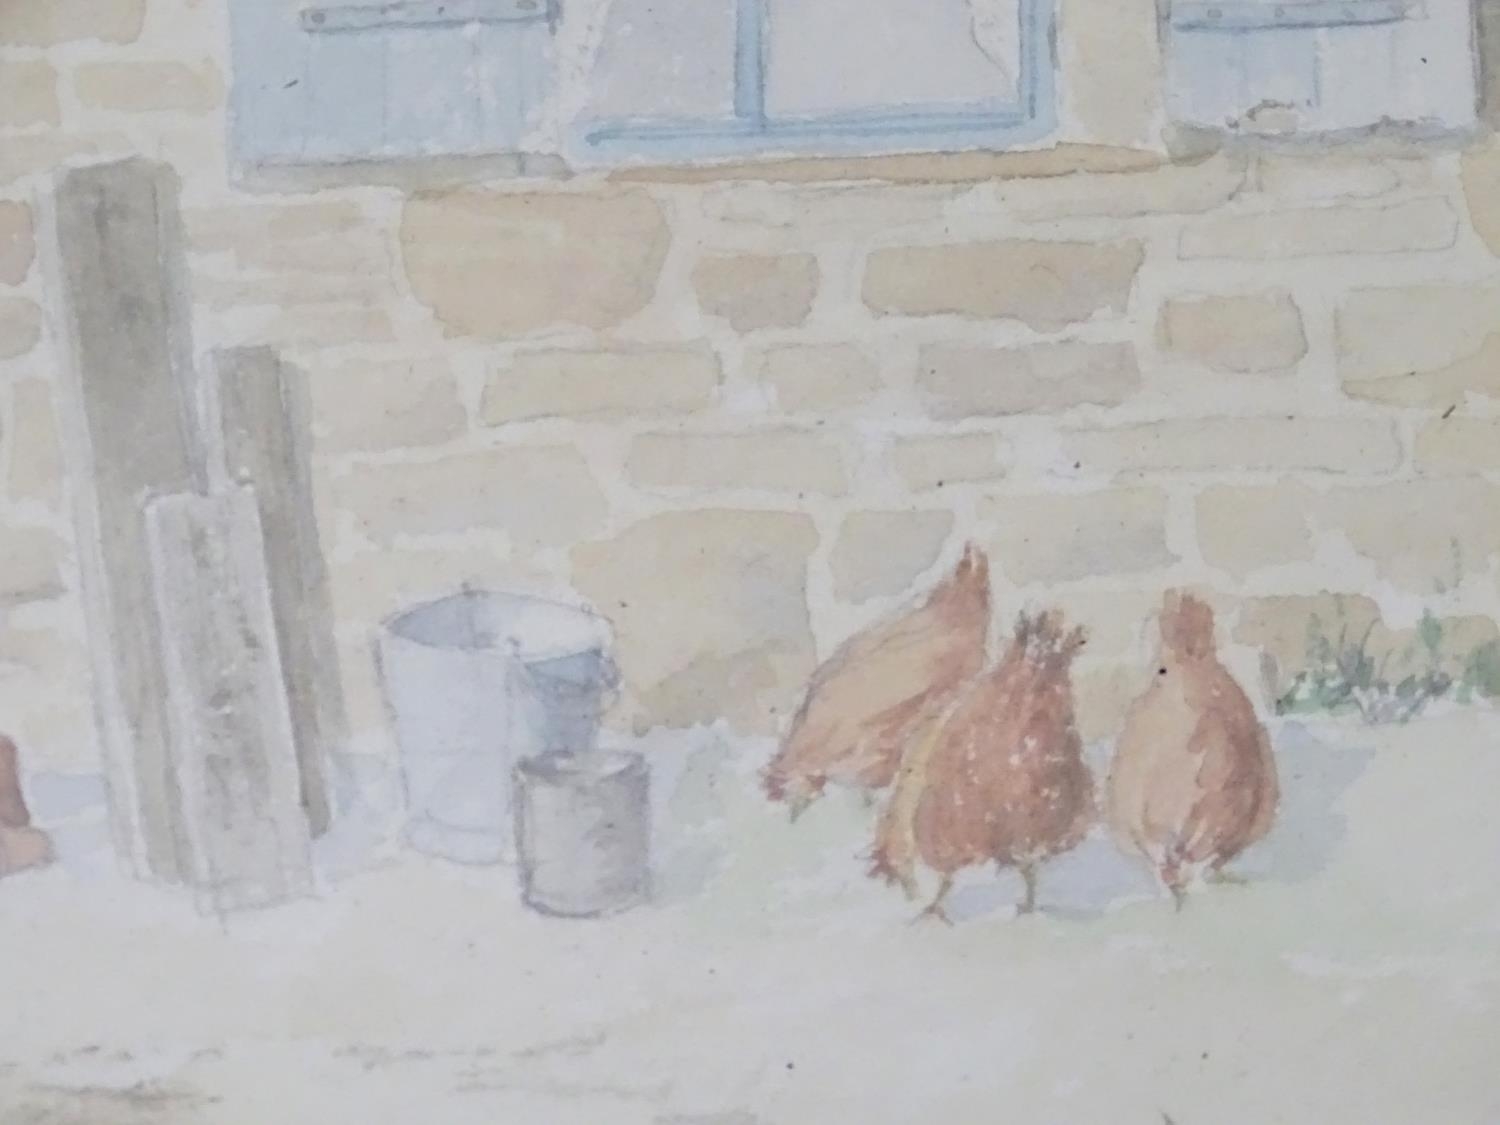 A watercolour depicting chickens in a barnyard, signed P. Tunnicliffe Please Note - we do not make - Image 5 of 6